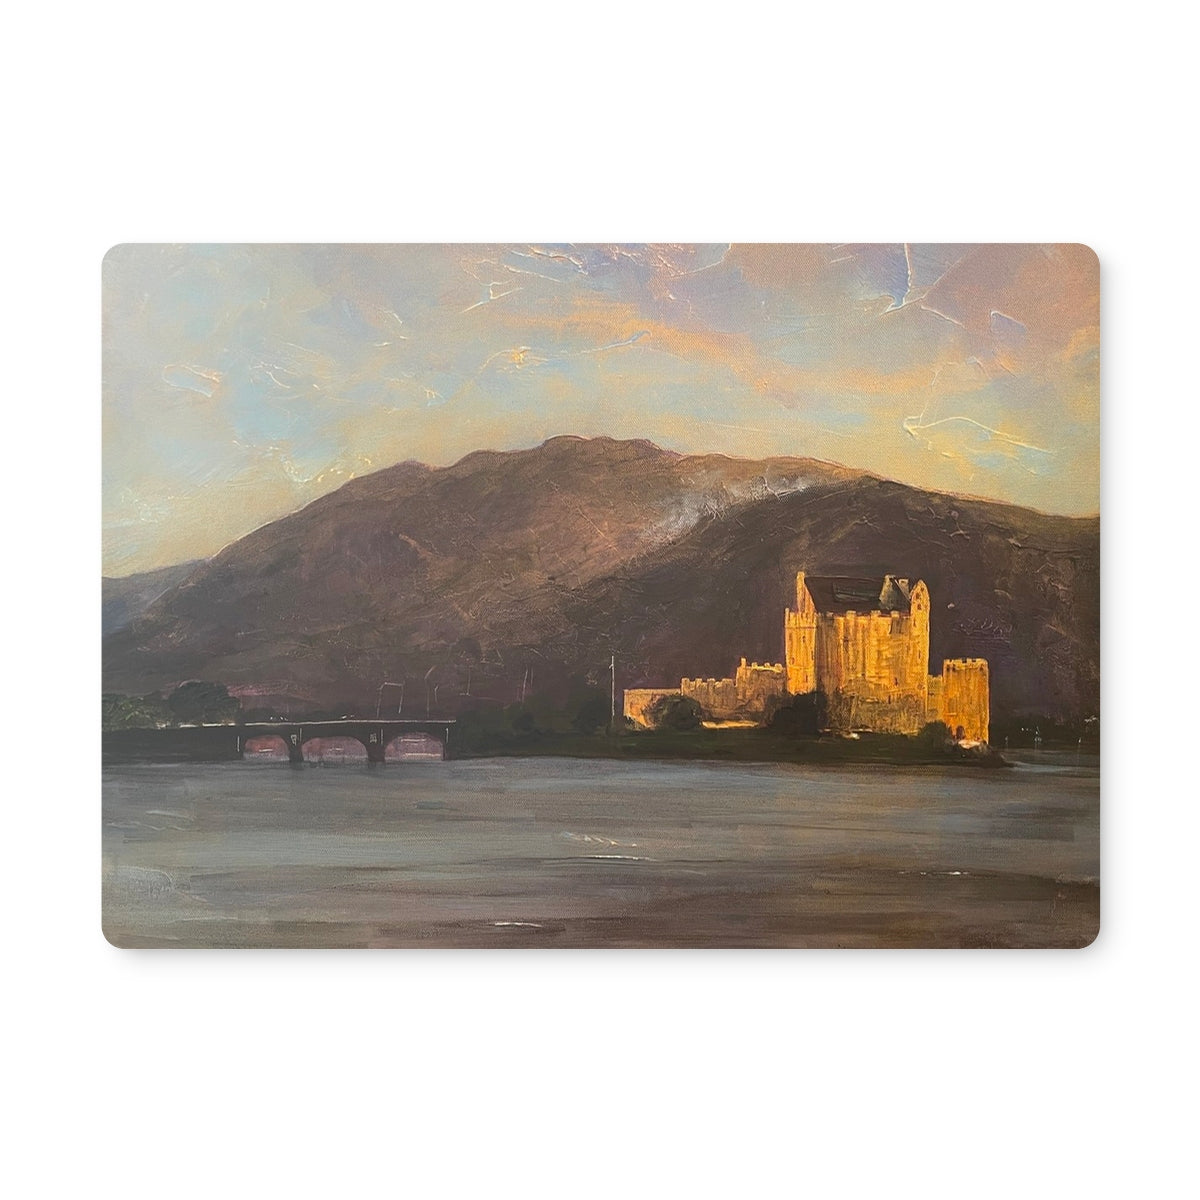 Eilean Donan Castle Art Gifts Placemat-Placemats-Historic & Iconic Scotland Art Gallery-2 Placemats-Paintings, Prints, Homeware, Art Gifts From Scotland By Scottish Artist Kevin Hunter